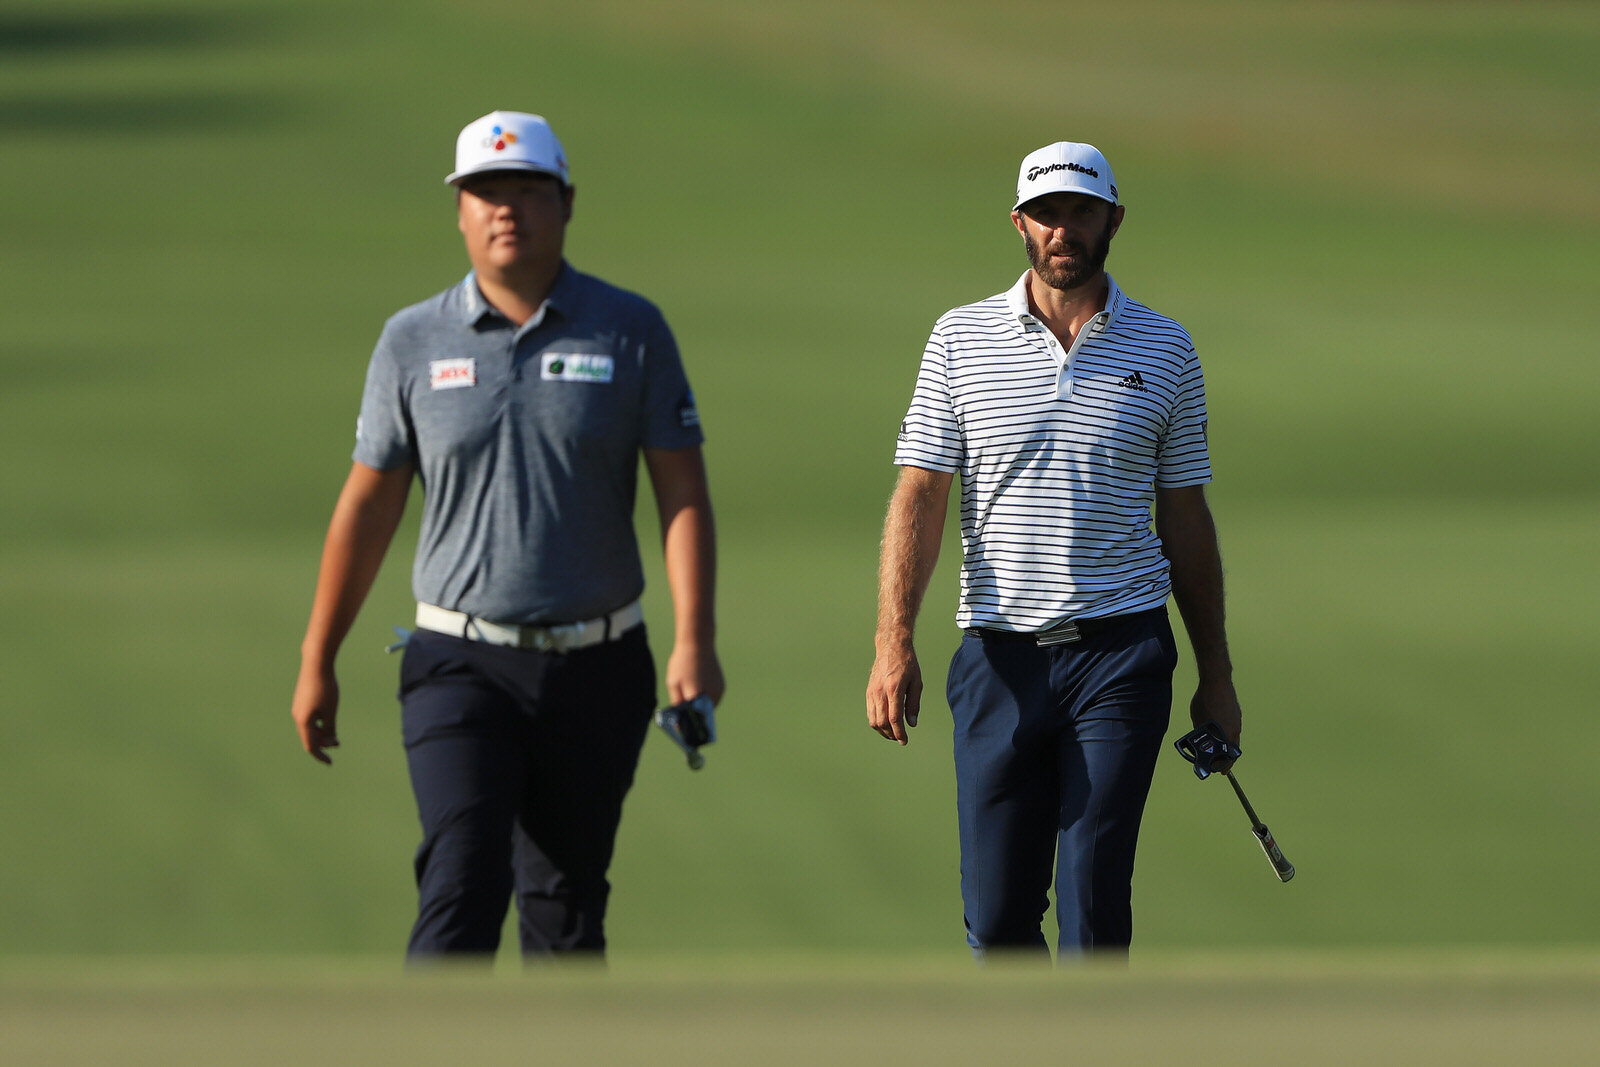  ATLANTA, GEORGIA - SEPTEMBER 06: Dustin Johnson of the United States and Sungjae Im of South Korea walk on the 14th hole during the third round of the TOUR Championship at East Lake Golf Club on September 06, 2020 in Atlanta, Georgia. (Photo by Sam 